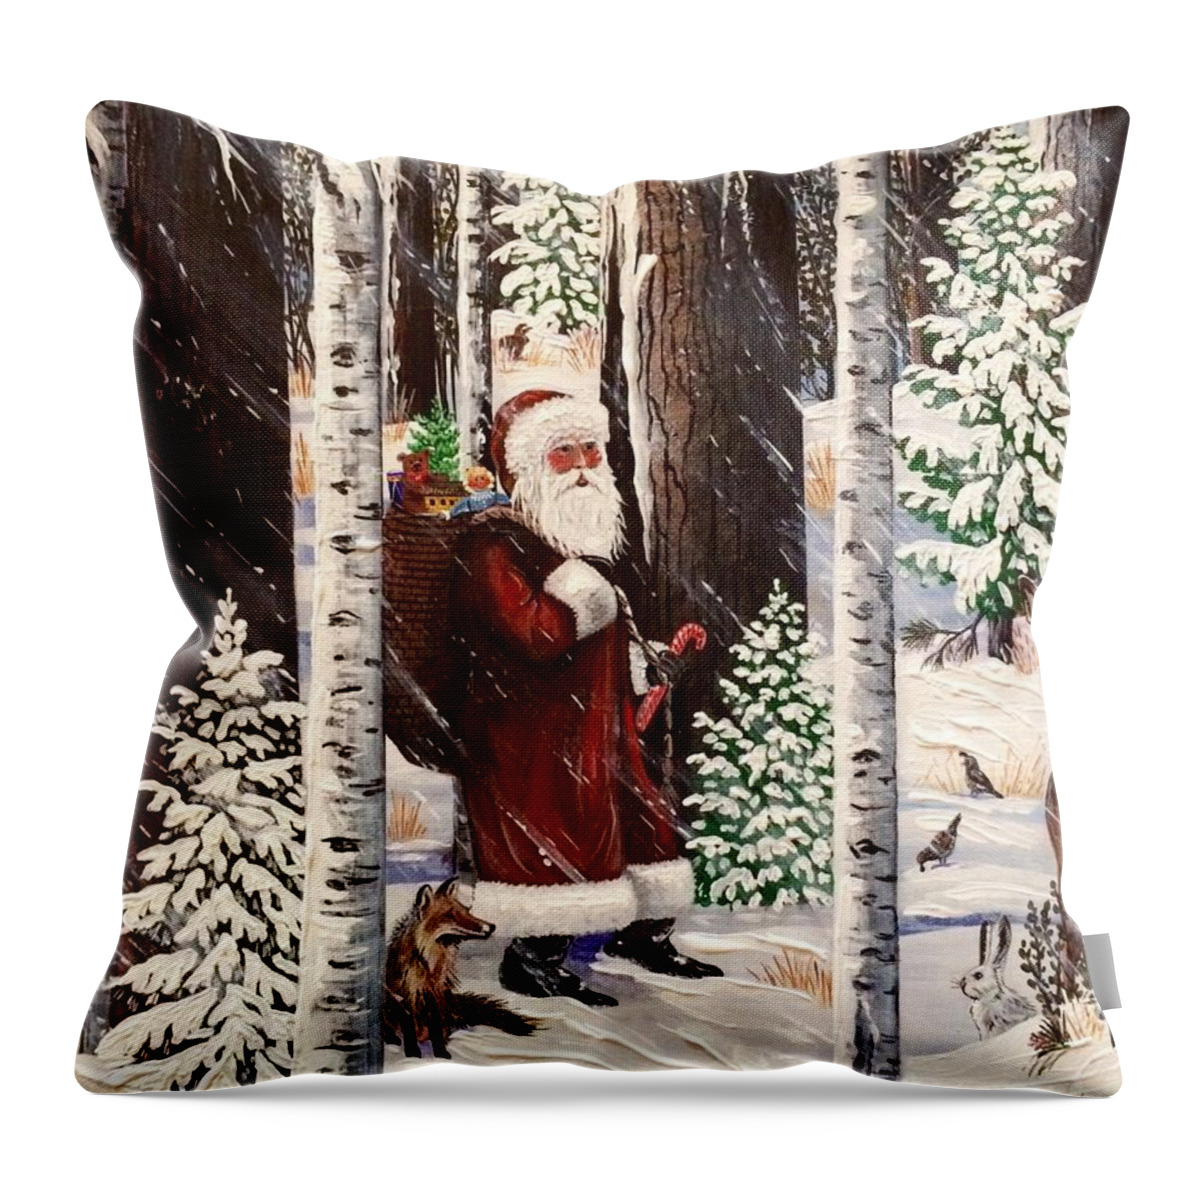 Santa Claus Throw Pillow featuring the painting The Christmas Forest Visitor 2 by Jennifer Lake